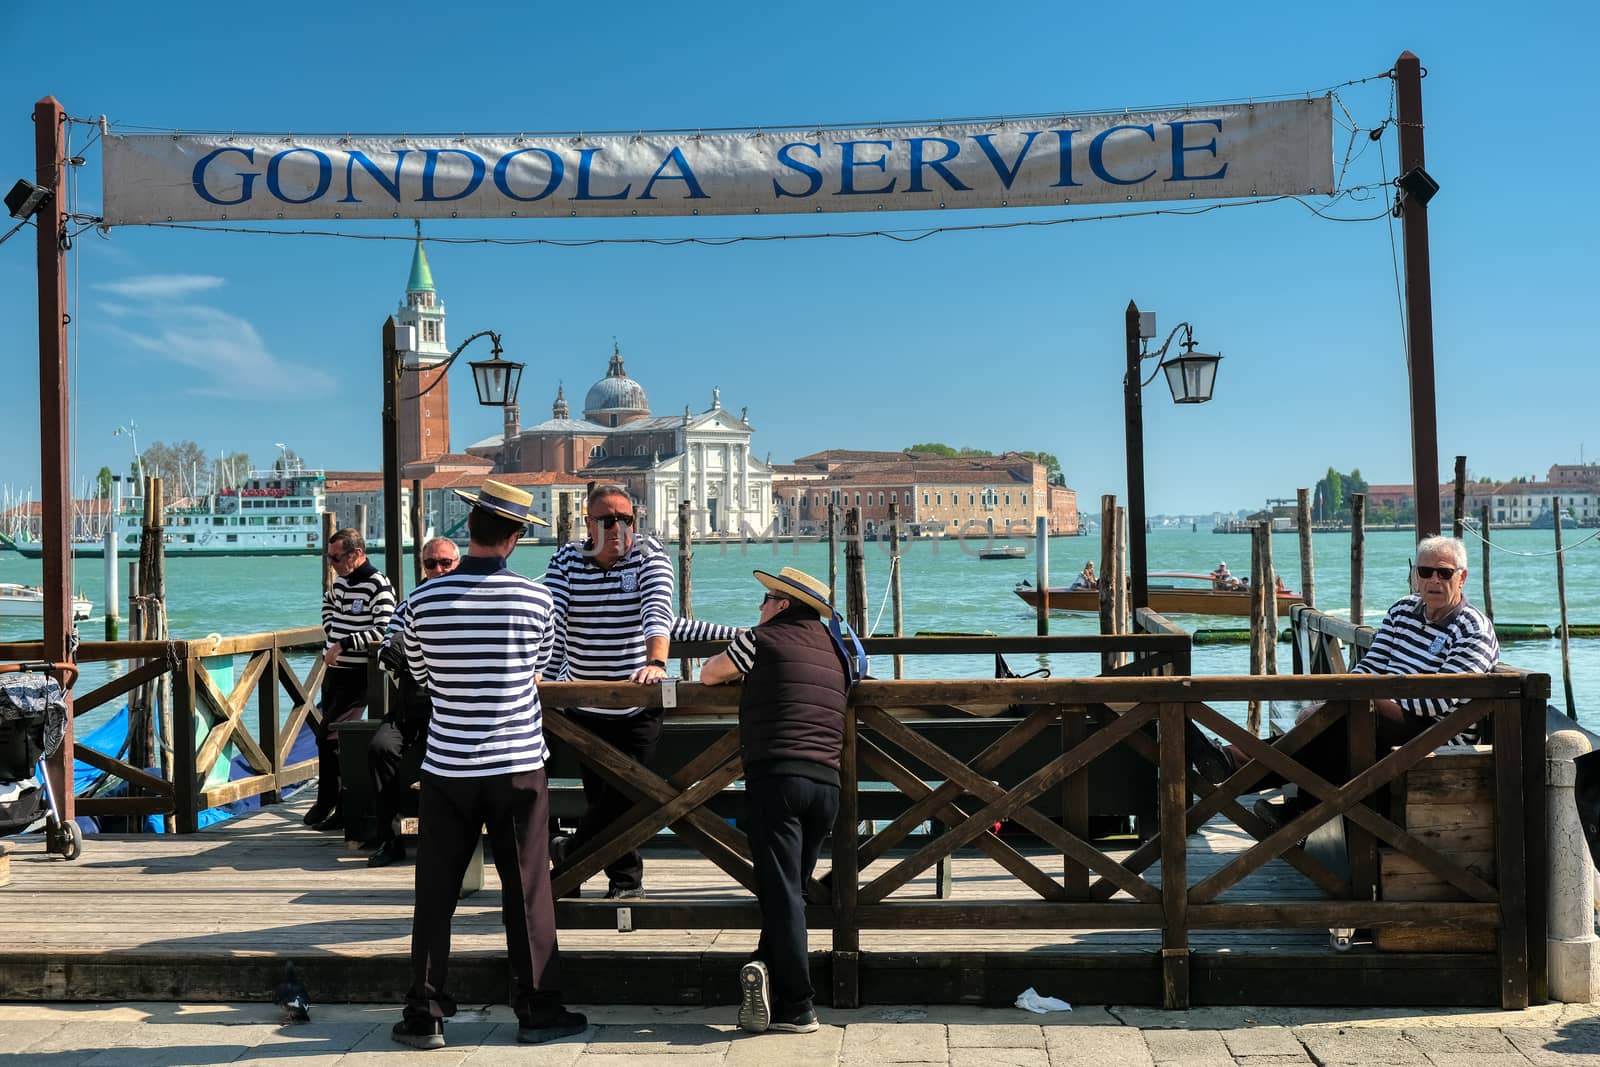 Gondoliers waiting at gondola service for customers at Saint Mark's square in Venice by asafaric